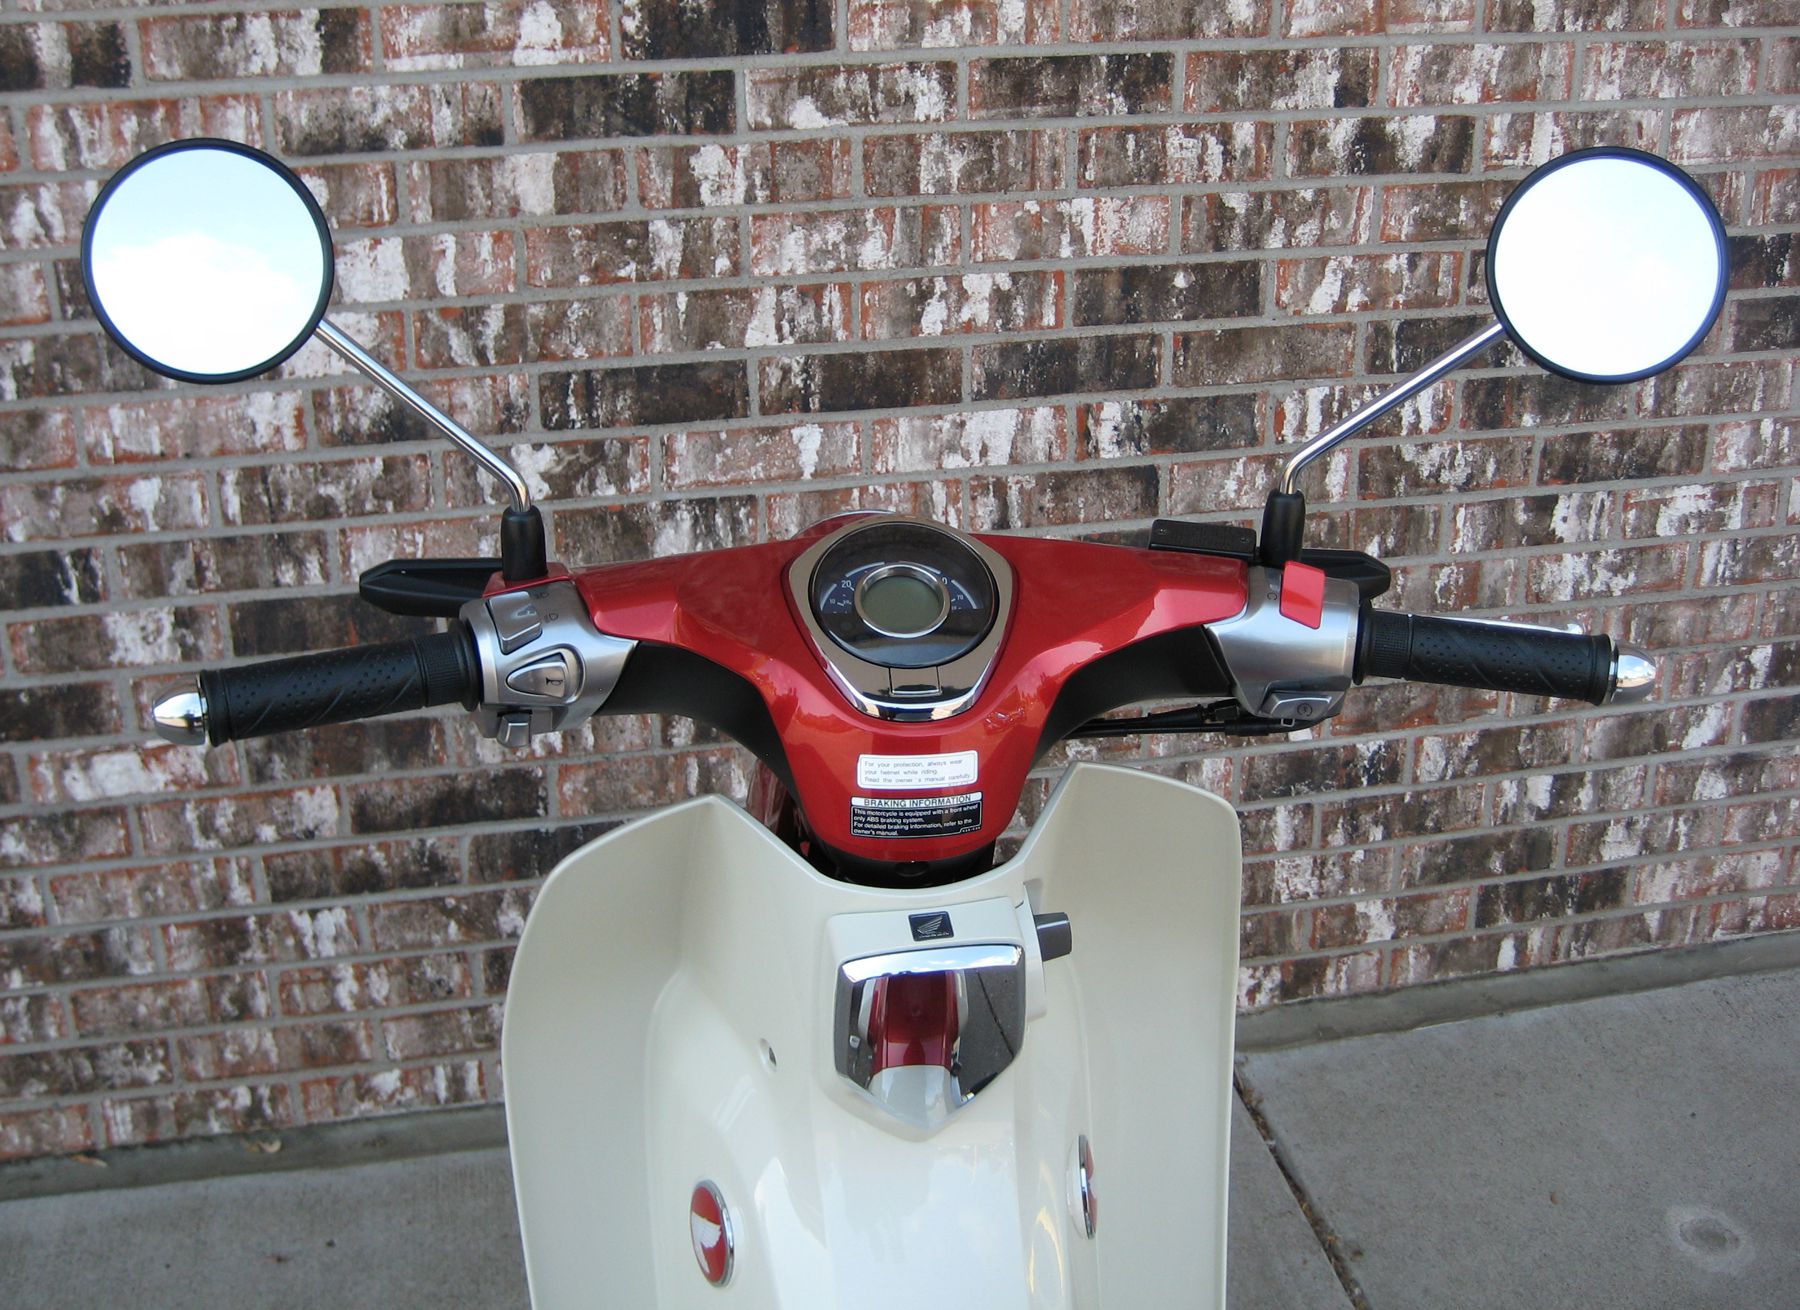 Rider view of the handlebars and dash cluster